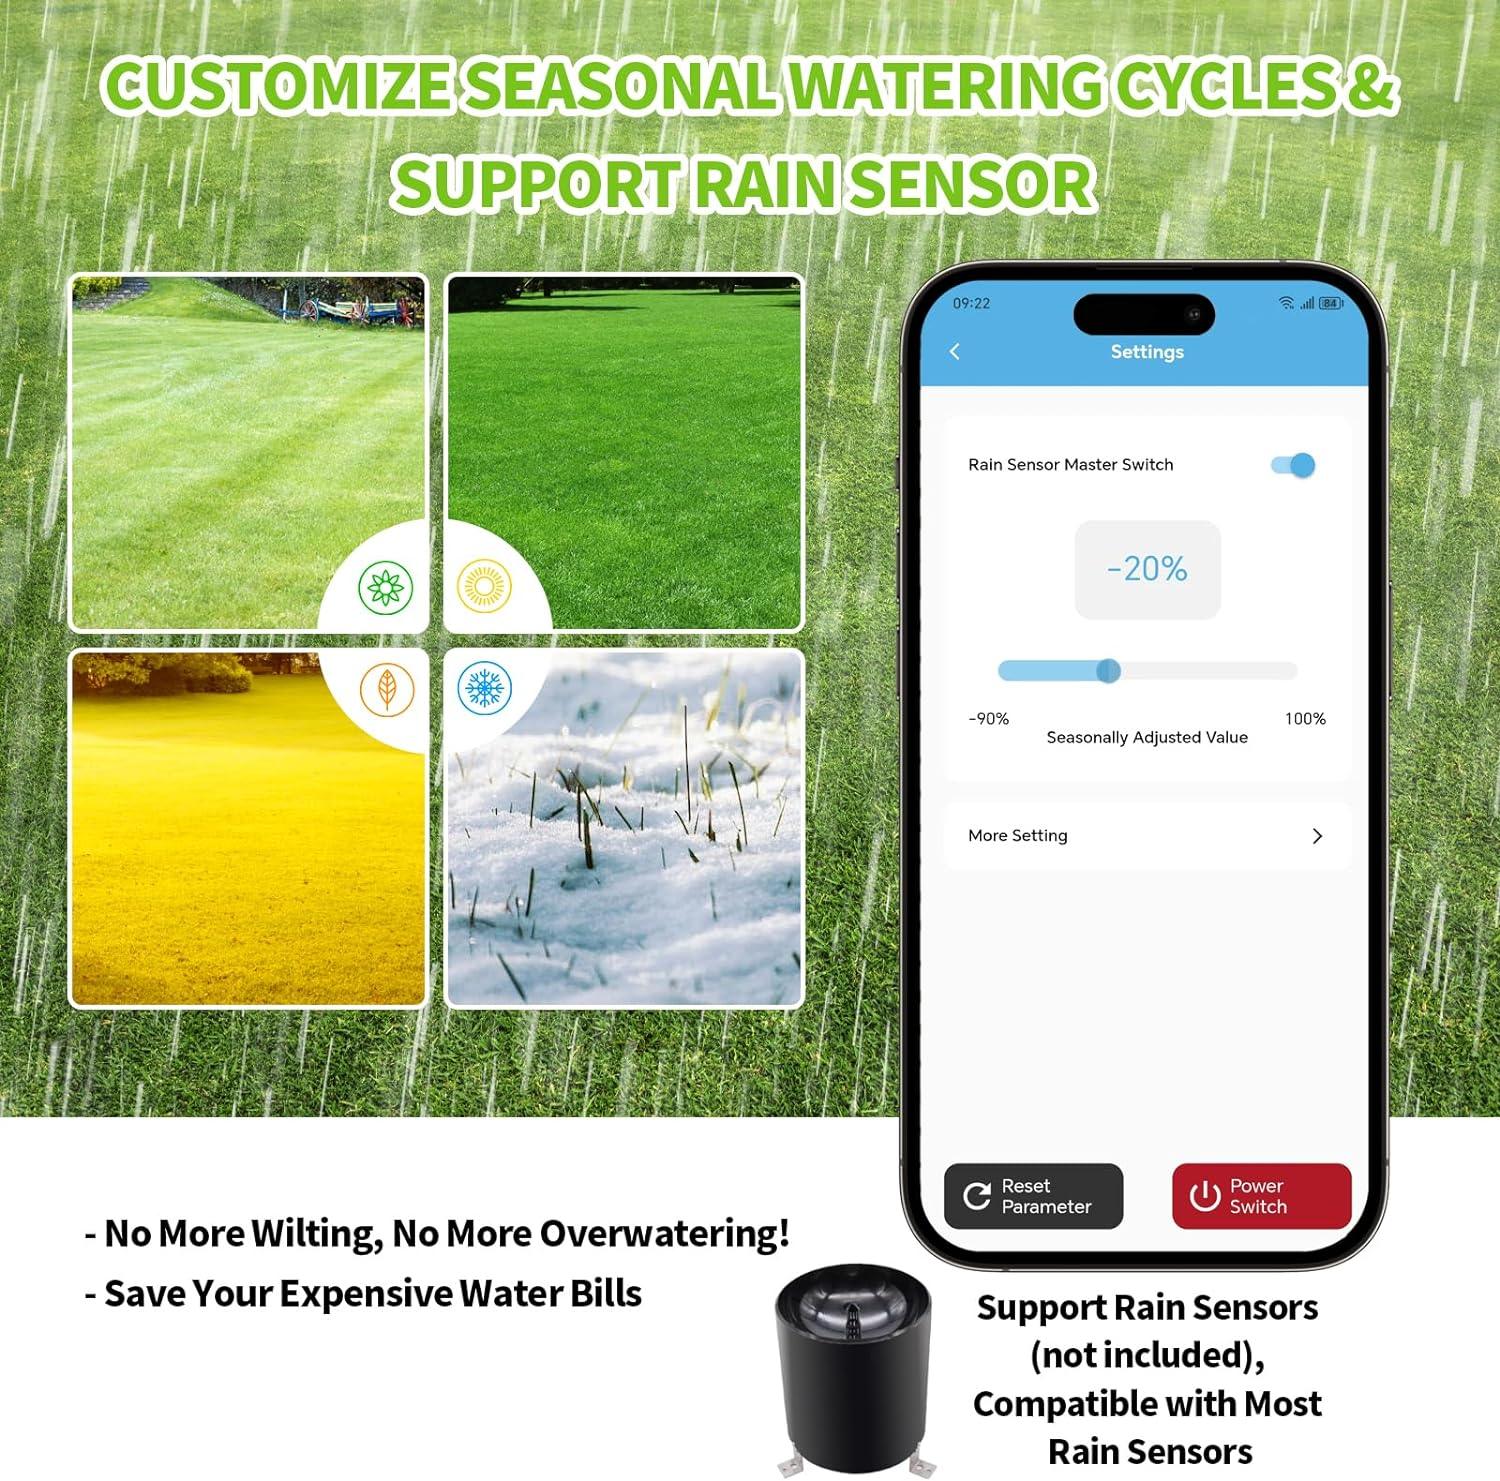 8 Zones WiFi Smart Sprinkler Controller, Briidea Automatic Irrigation Controllers with Customized Watering Schedule & Seasonal Adjustment, Save Water and Keep Your Plants Thrive